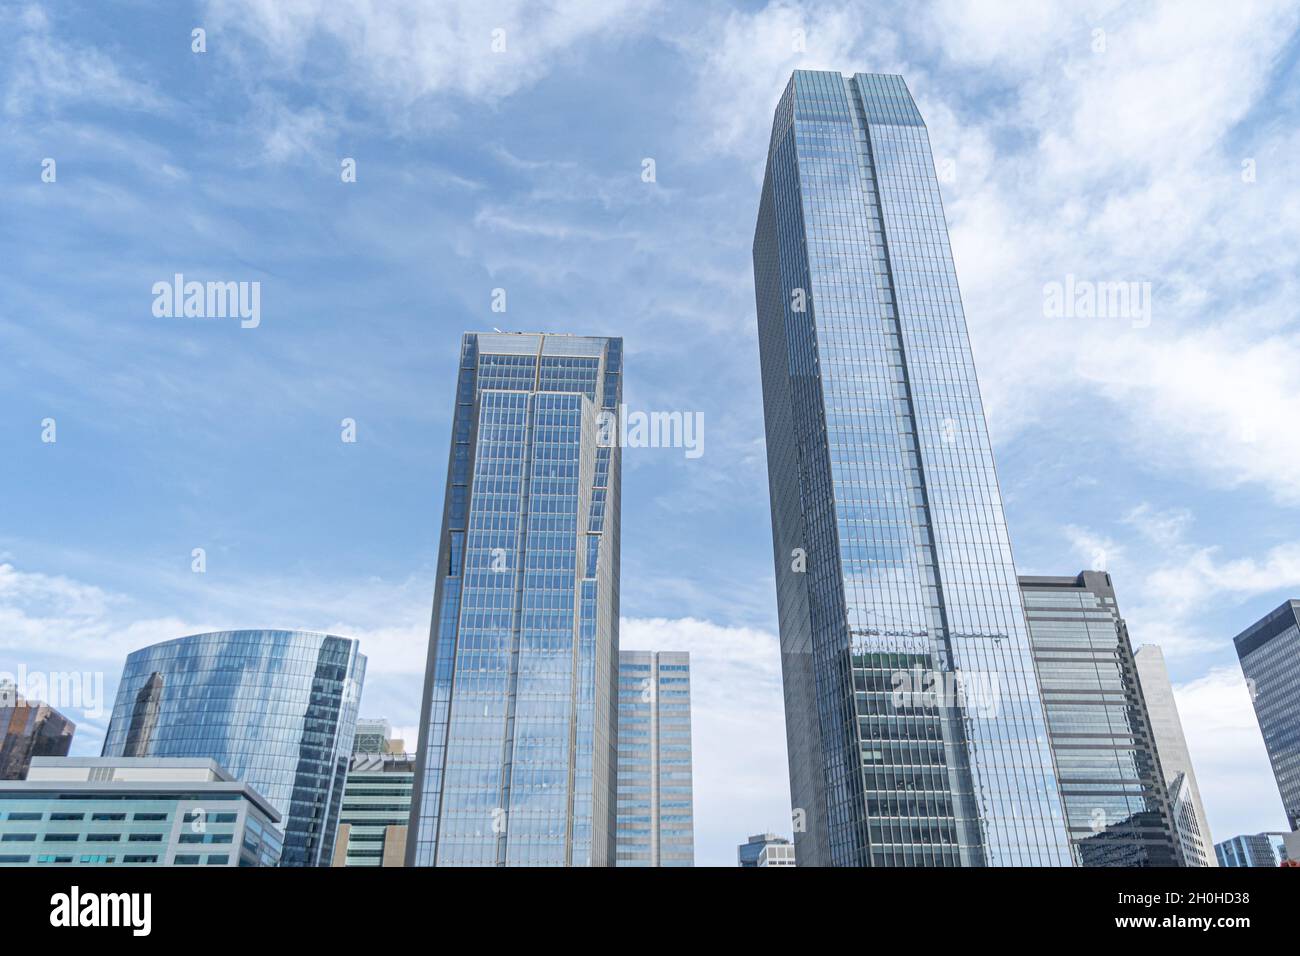 Downtown Calgary City business district core Skyline Stock Photo